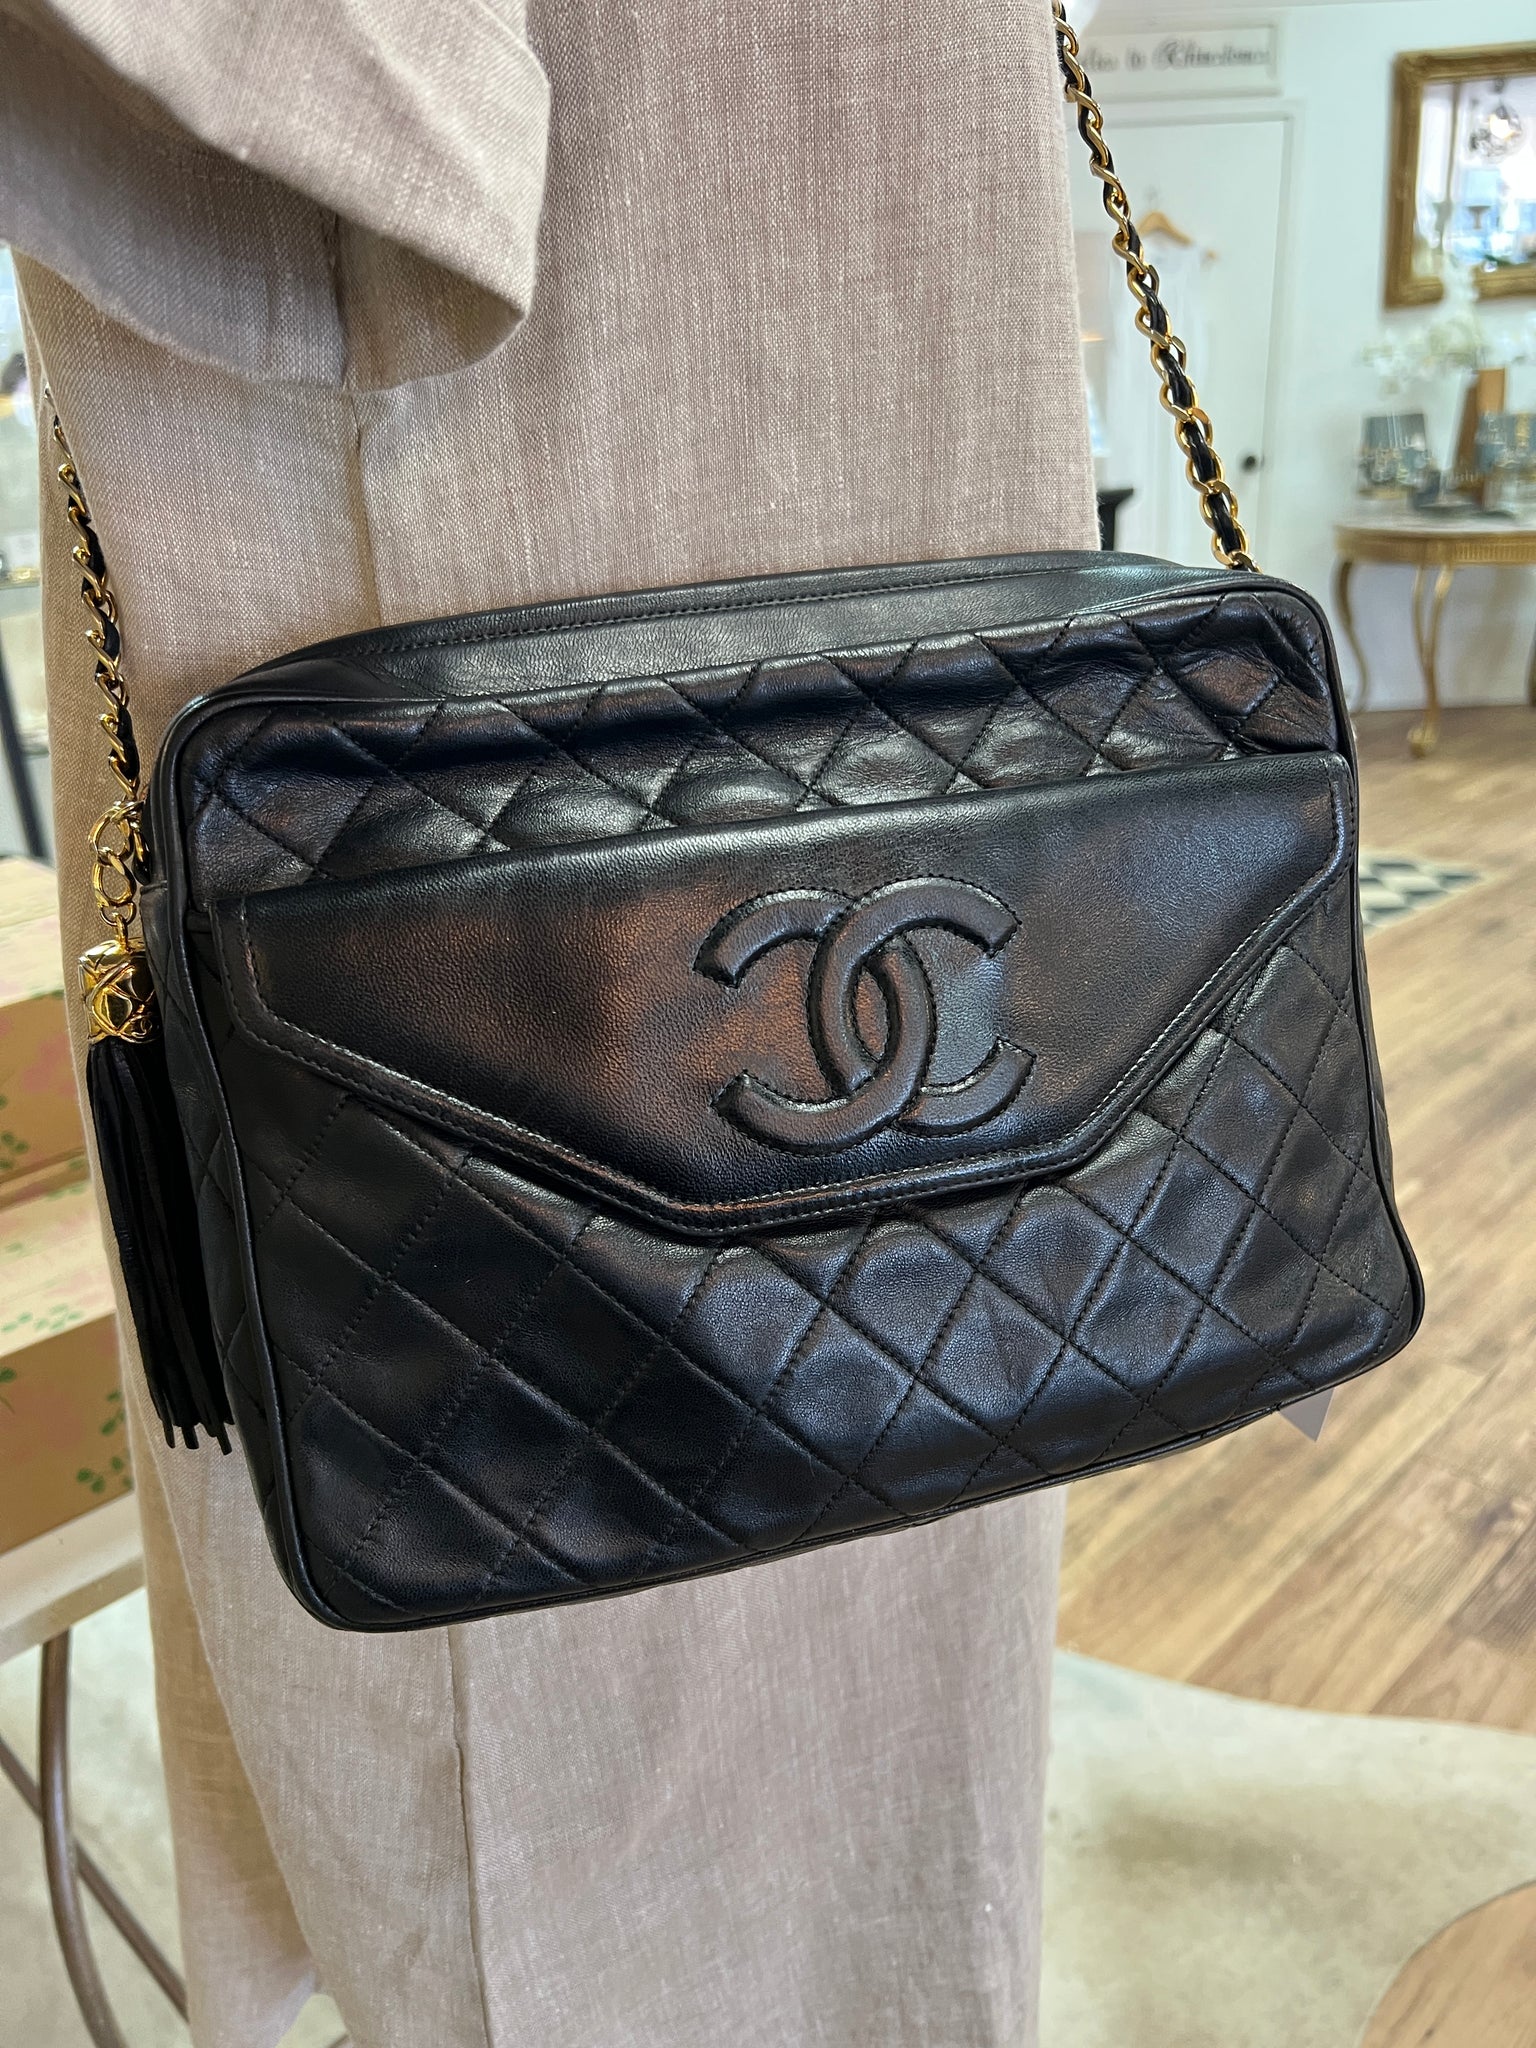 black and white chanel handbags authentic